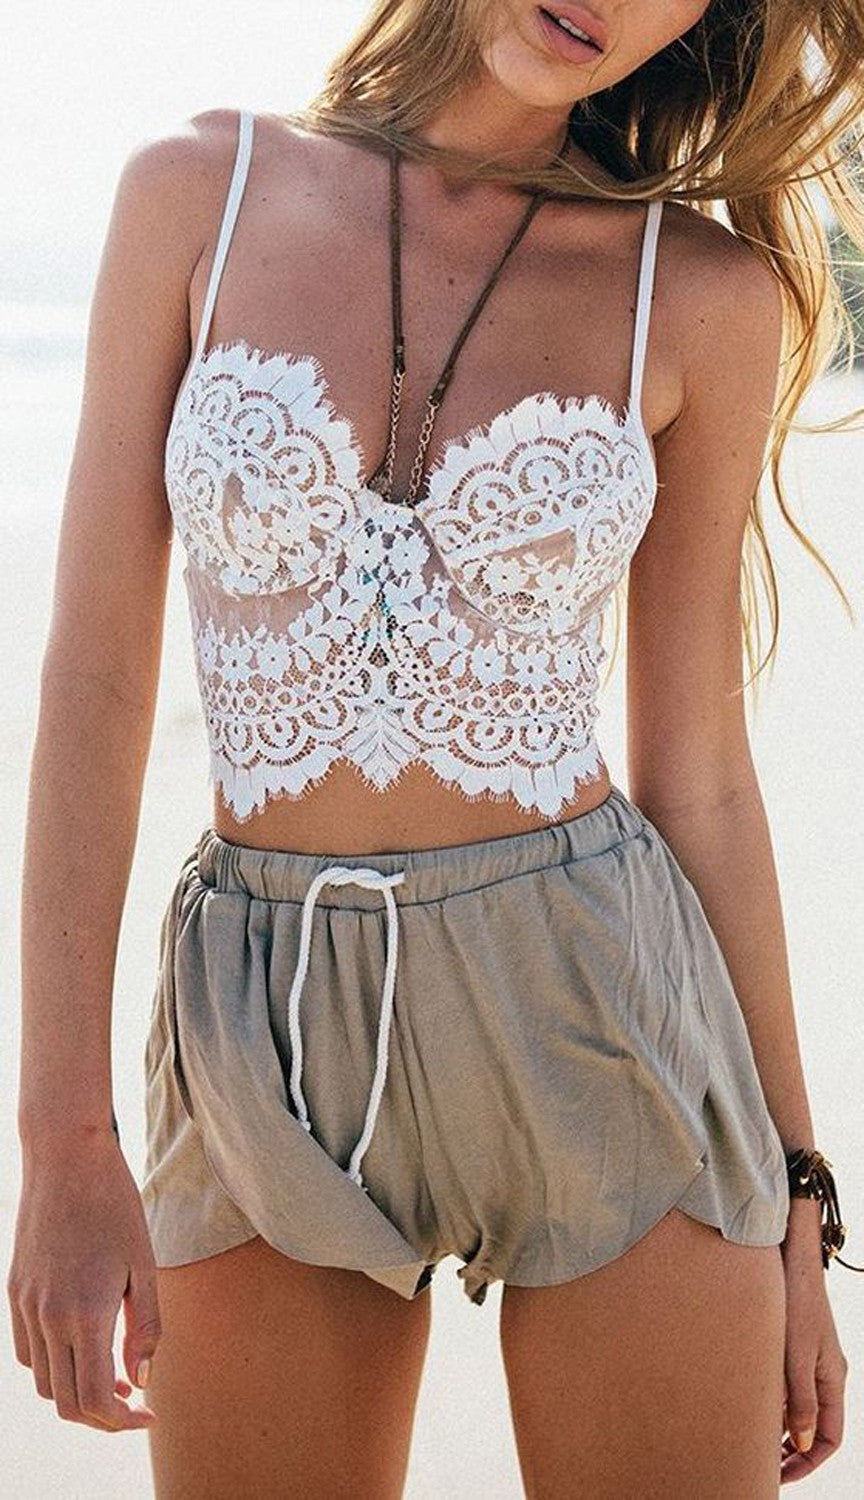 Trending Womens Summer 2017 for the Beach, Festivals, Coachella, Electric Daisy Carnival -  Outfits Bralette Outfit - MyBodiArt.com